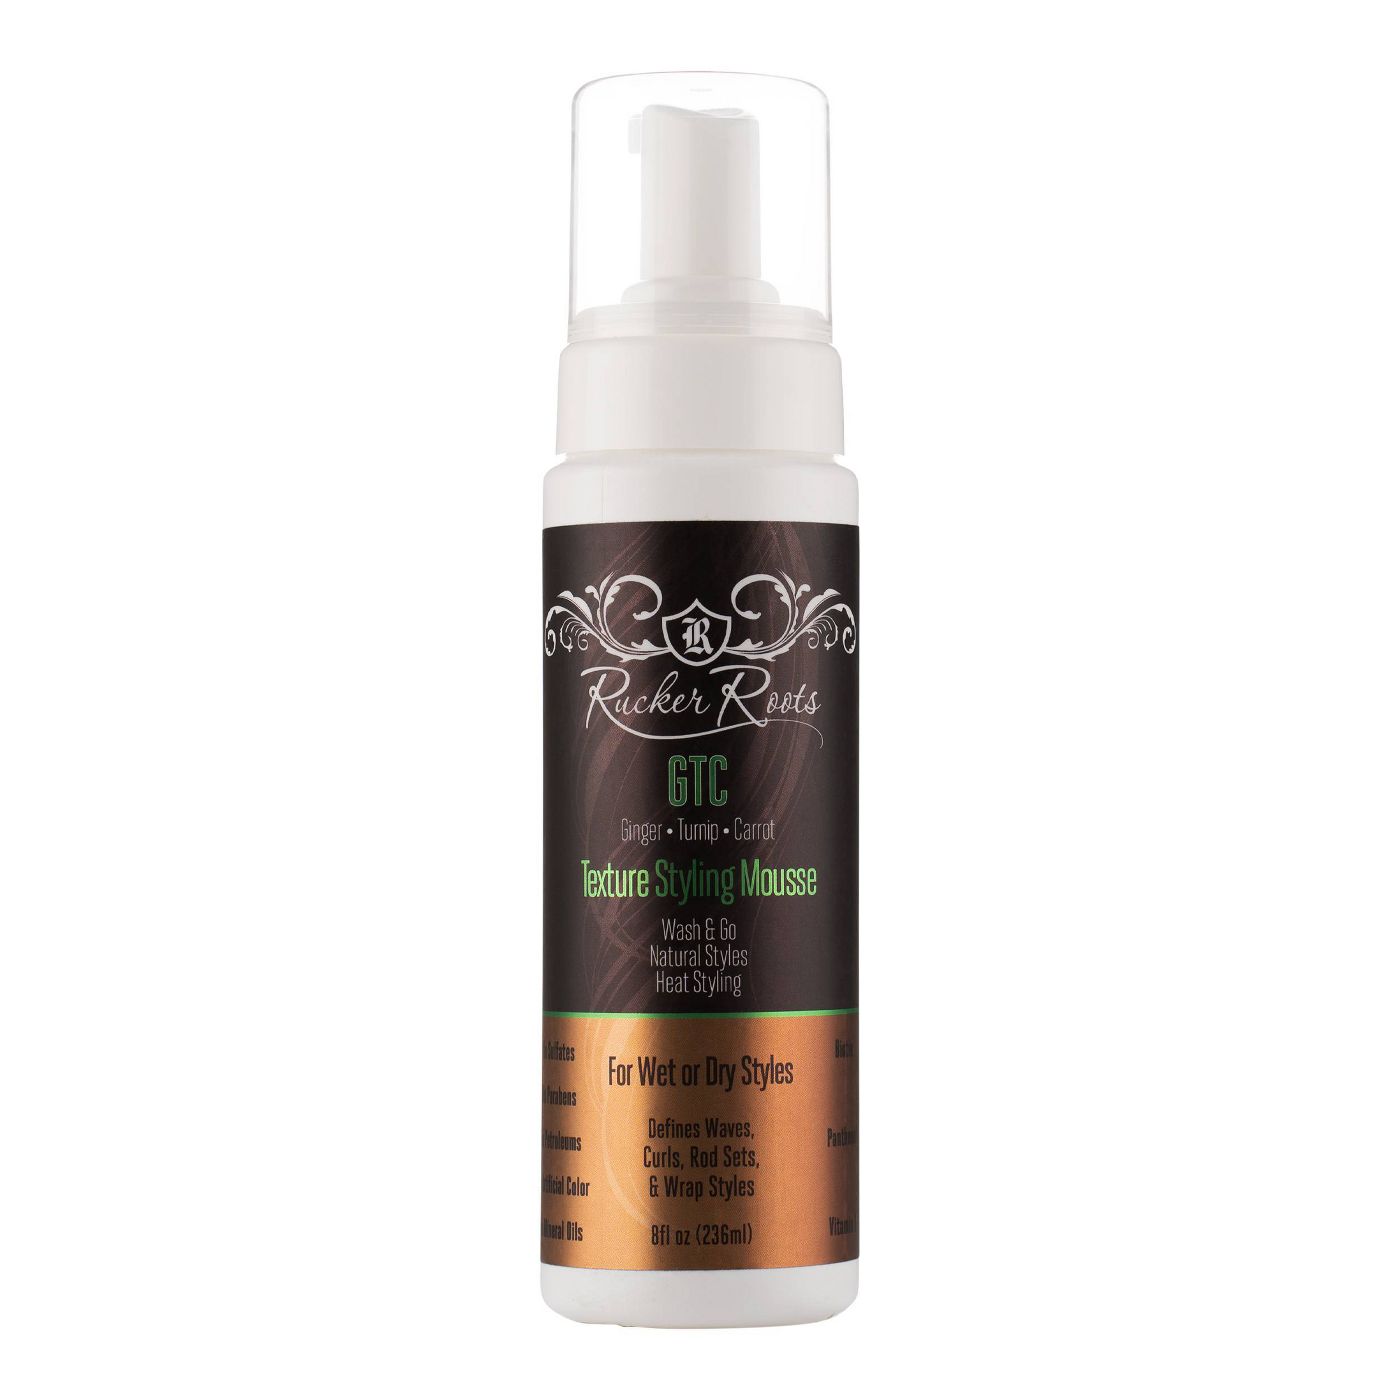 Rucker Roots Gtc Texture Hair Styling Mousse - 8 Fl Oz